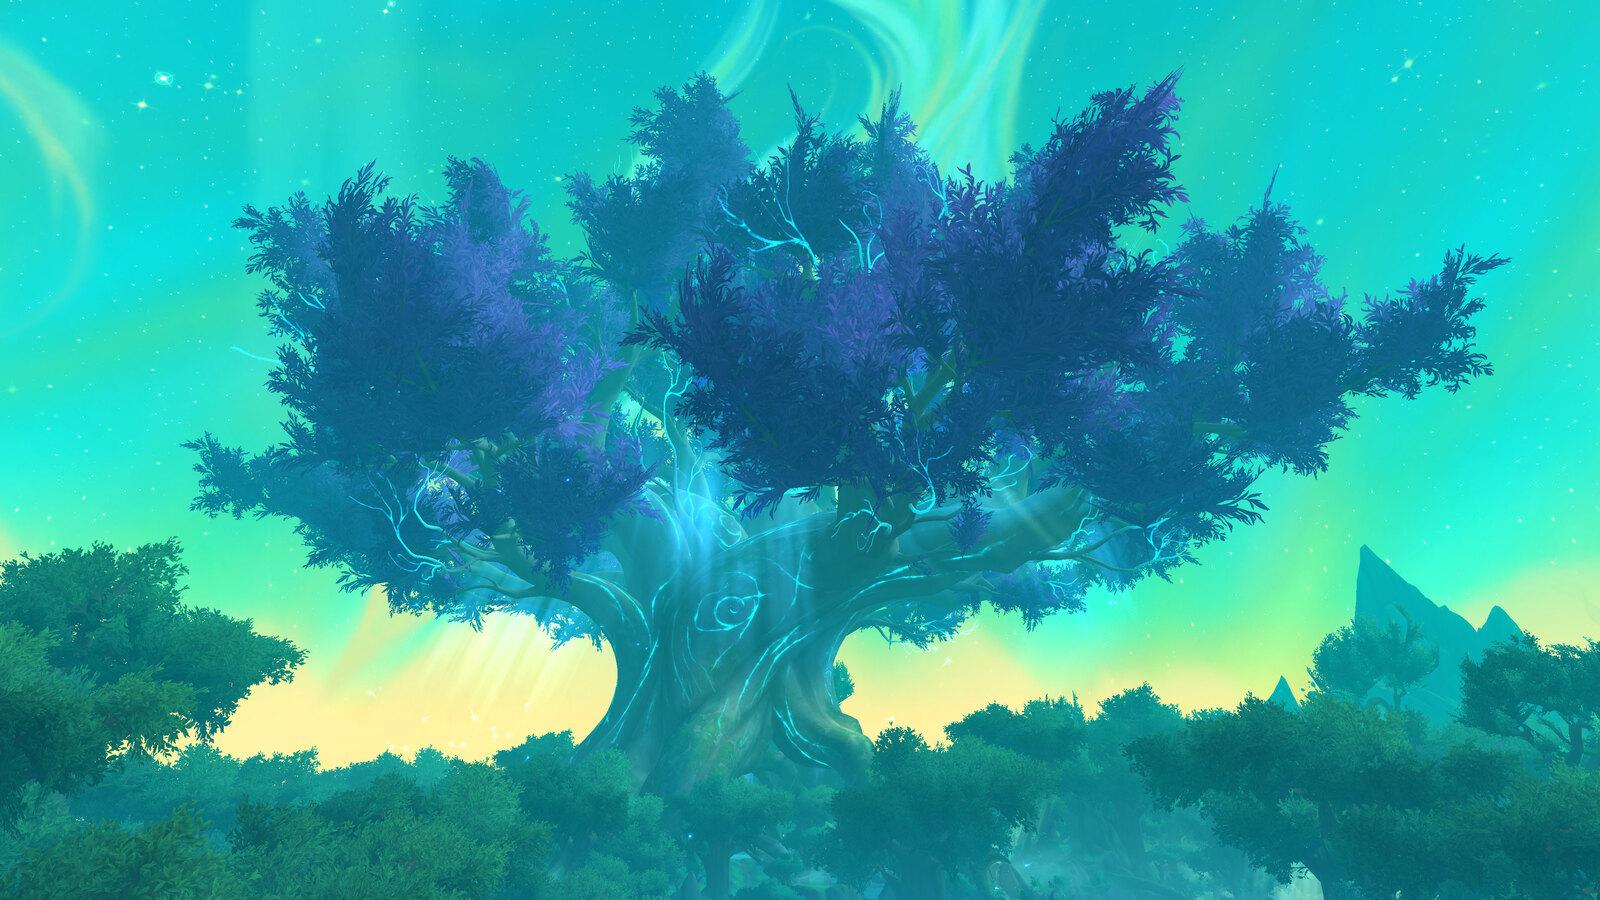 Amirdrassil, home of the Druids (Hero Talents guide)